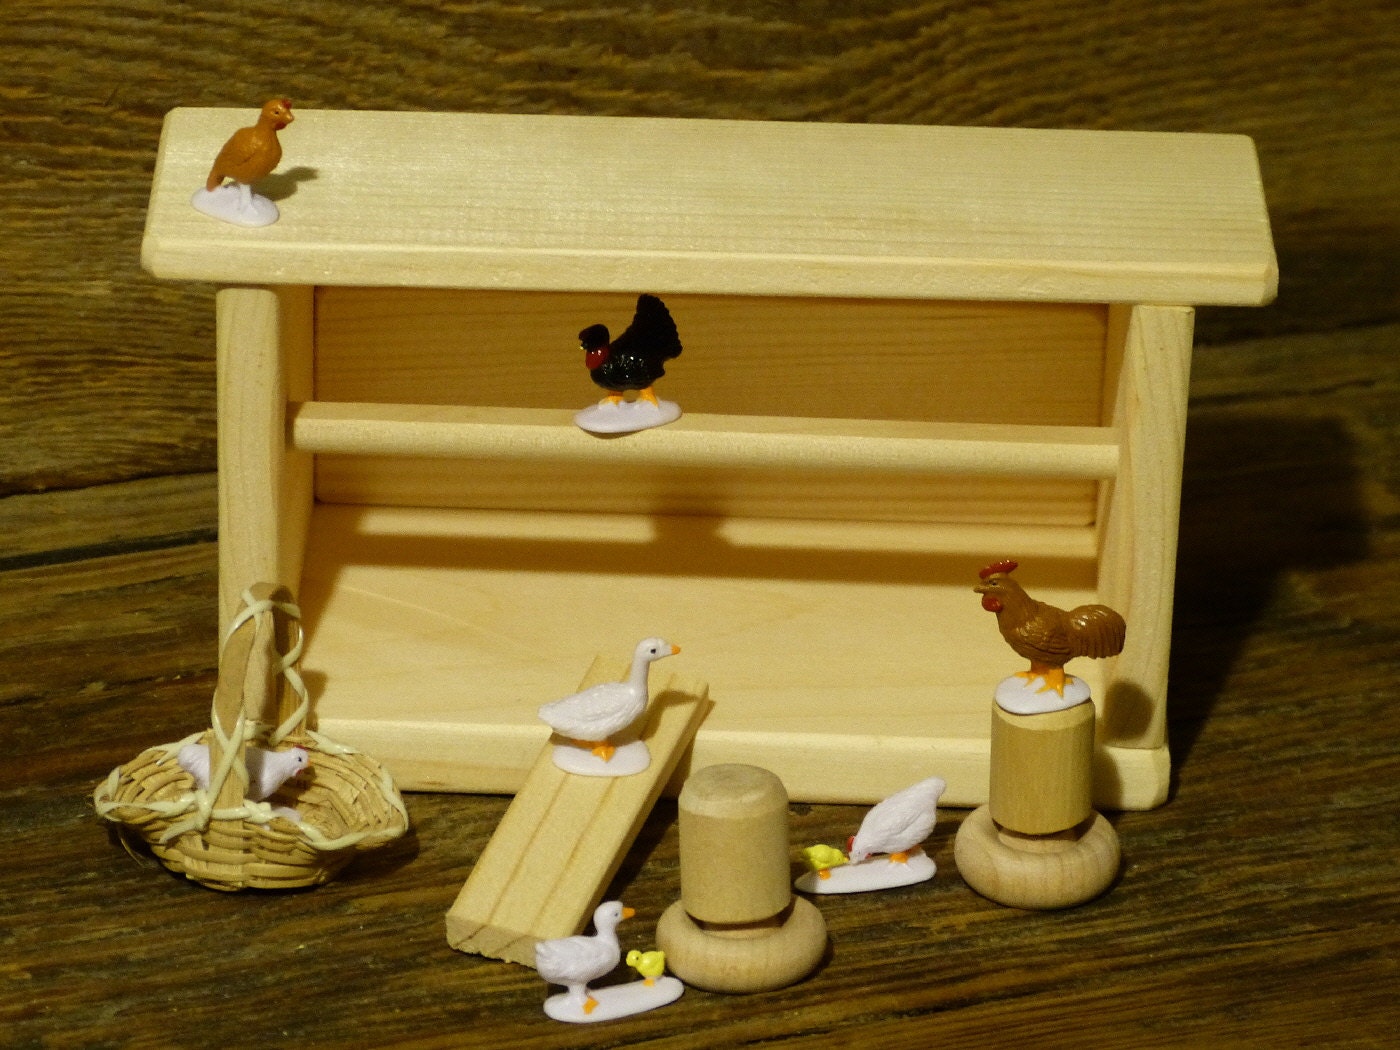 Wooden Toy Chicken Coop Girls Boys Miniature by OutOnALimbADK